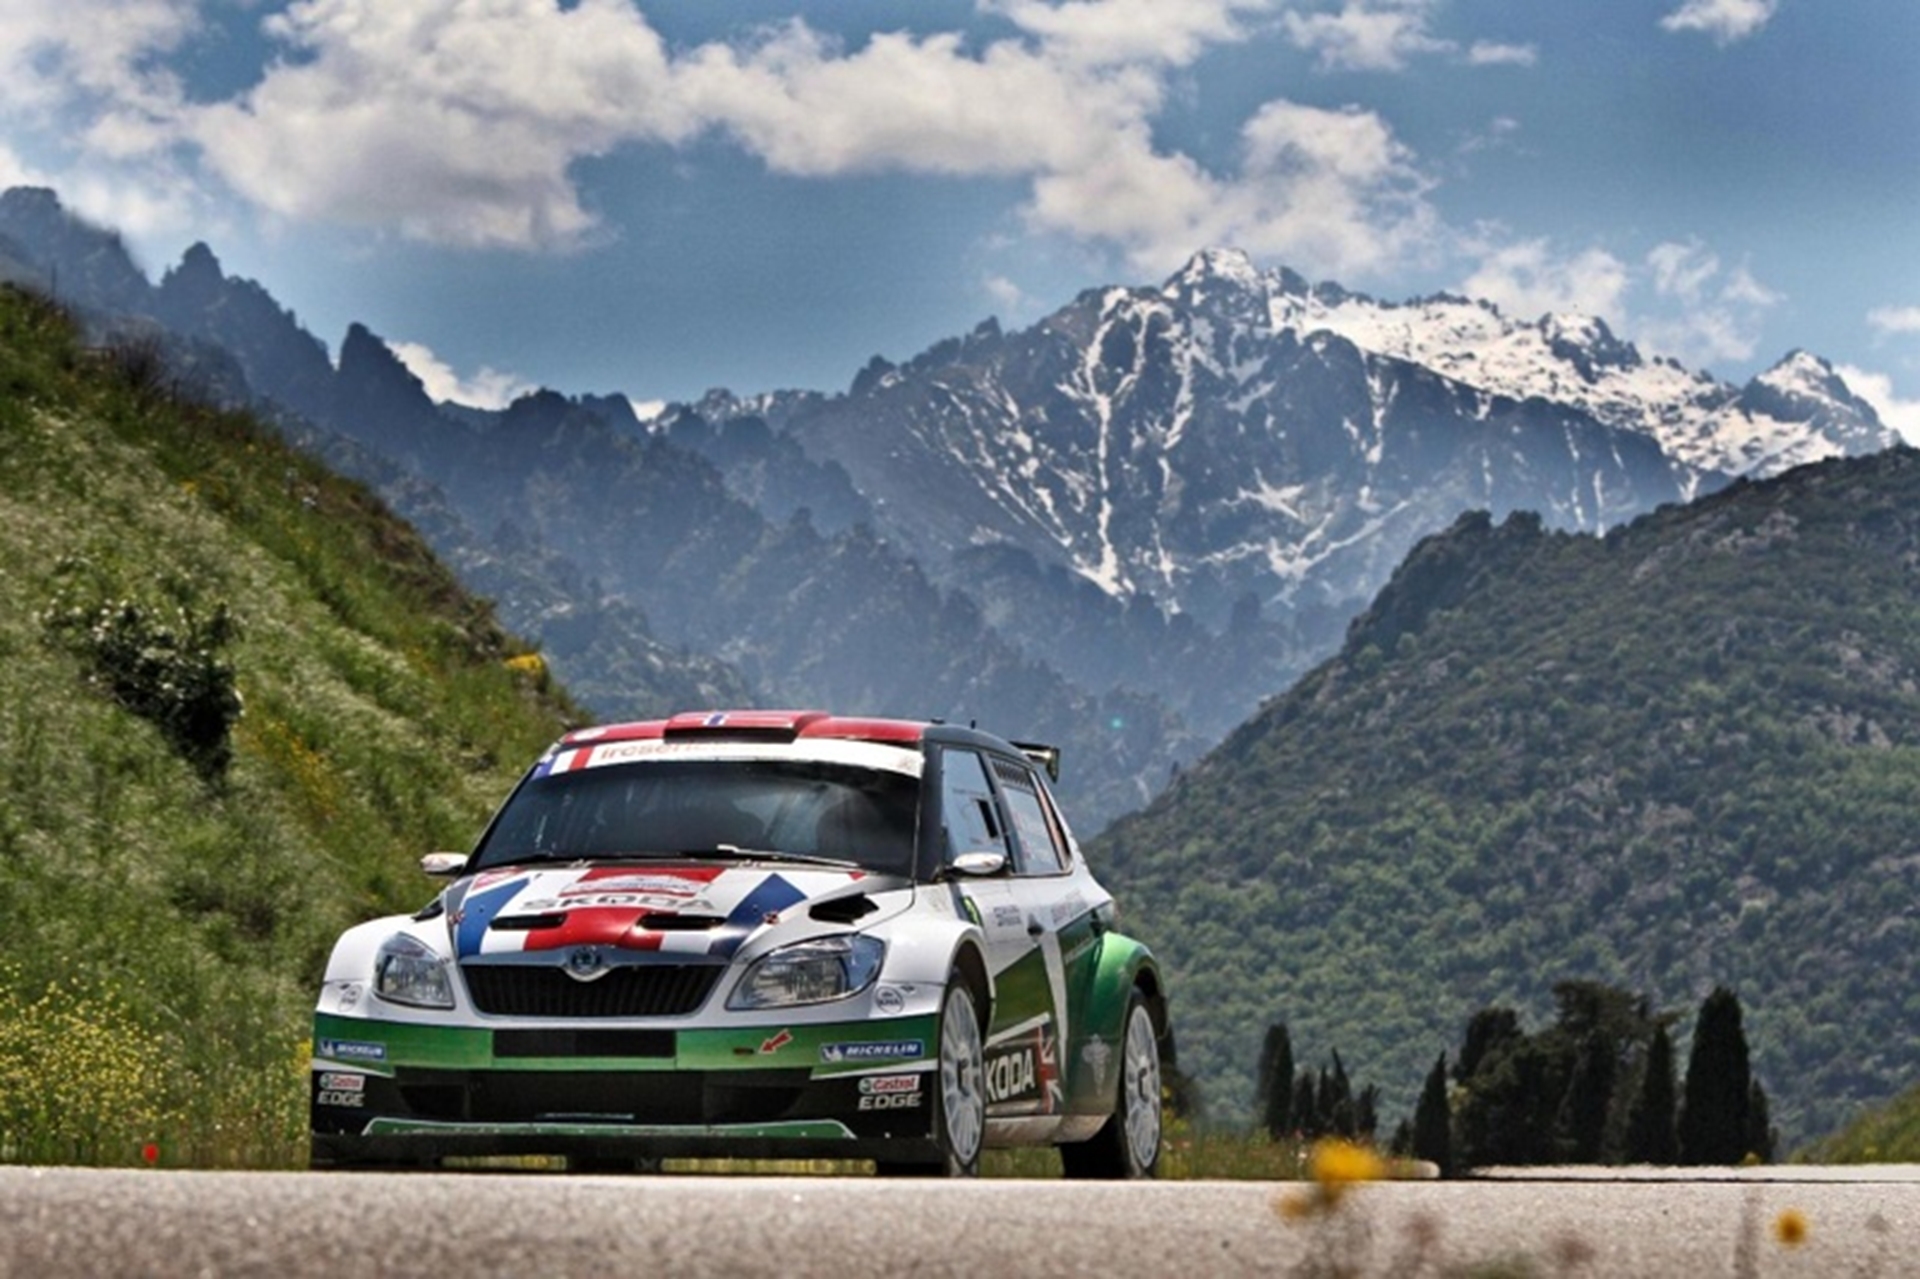 MIKKELSEN MAINTAINS IRC LEAD AFTER TOUR OF CORSICA